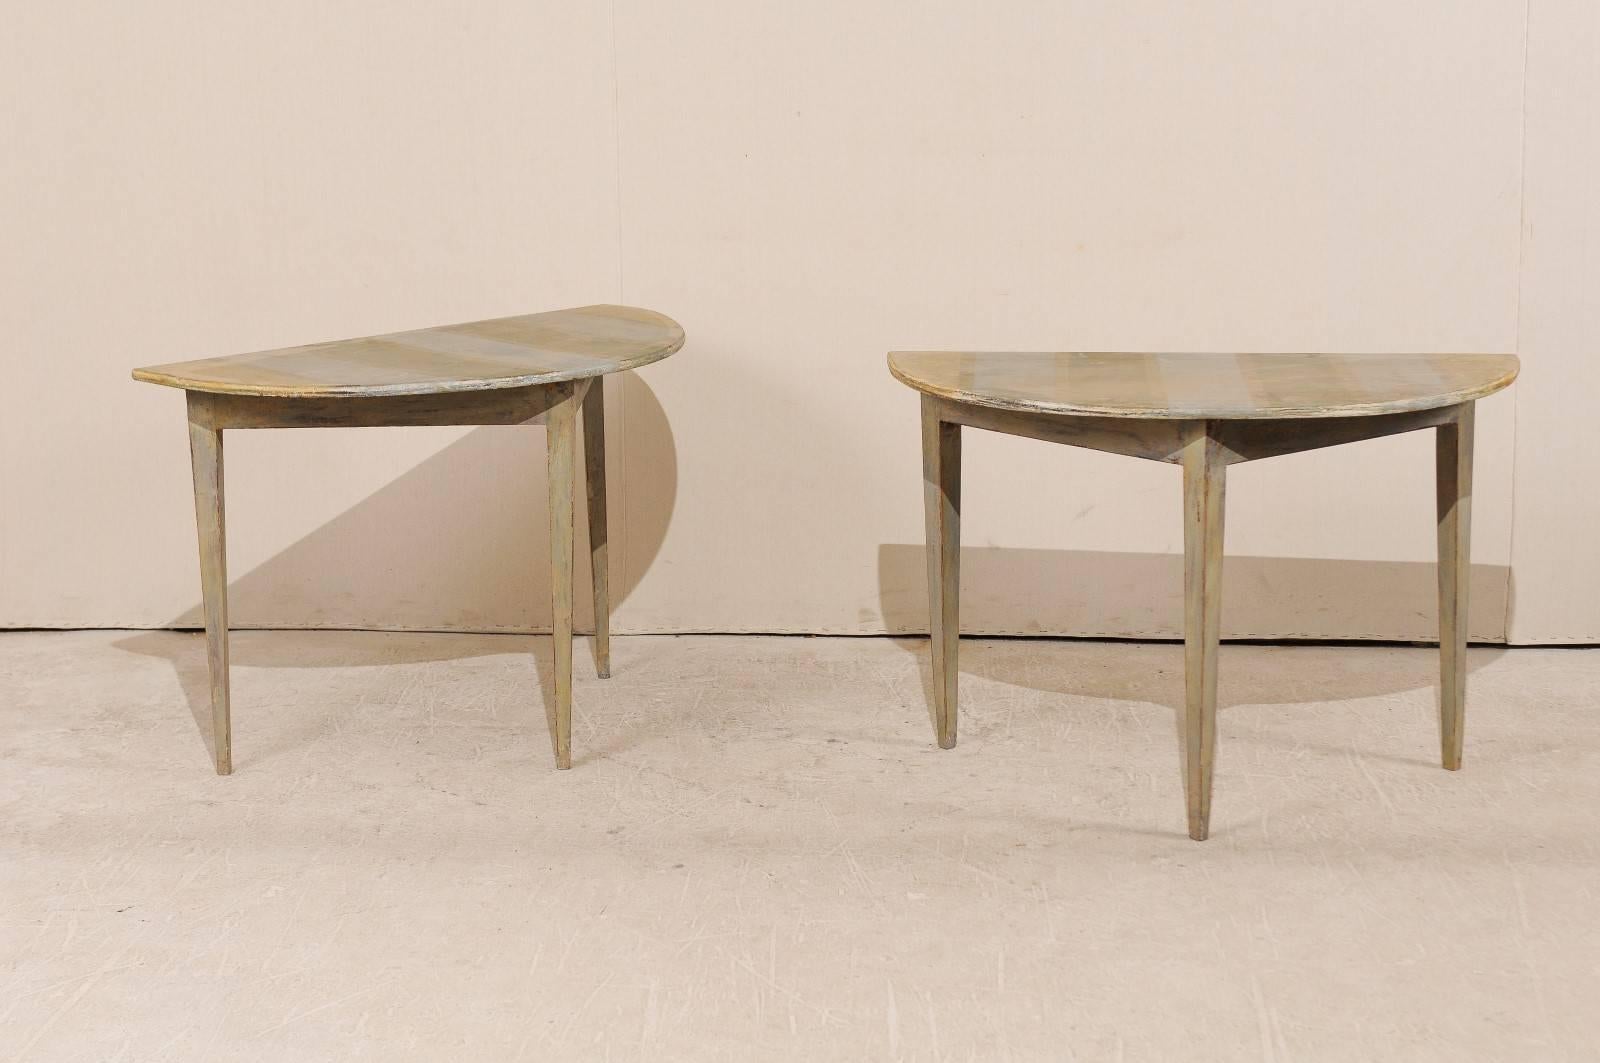 A Pair of 19th century Swedish painted wood demilune tables. This pair of Swedish demilune table features a semi-circular top over a triangular shaped apron. The top has a custom painted stripe design in a pale blue and green and the overall table